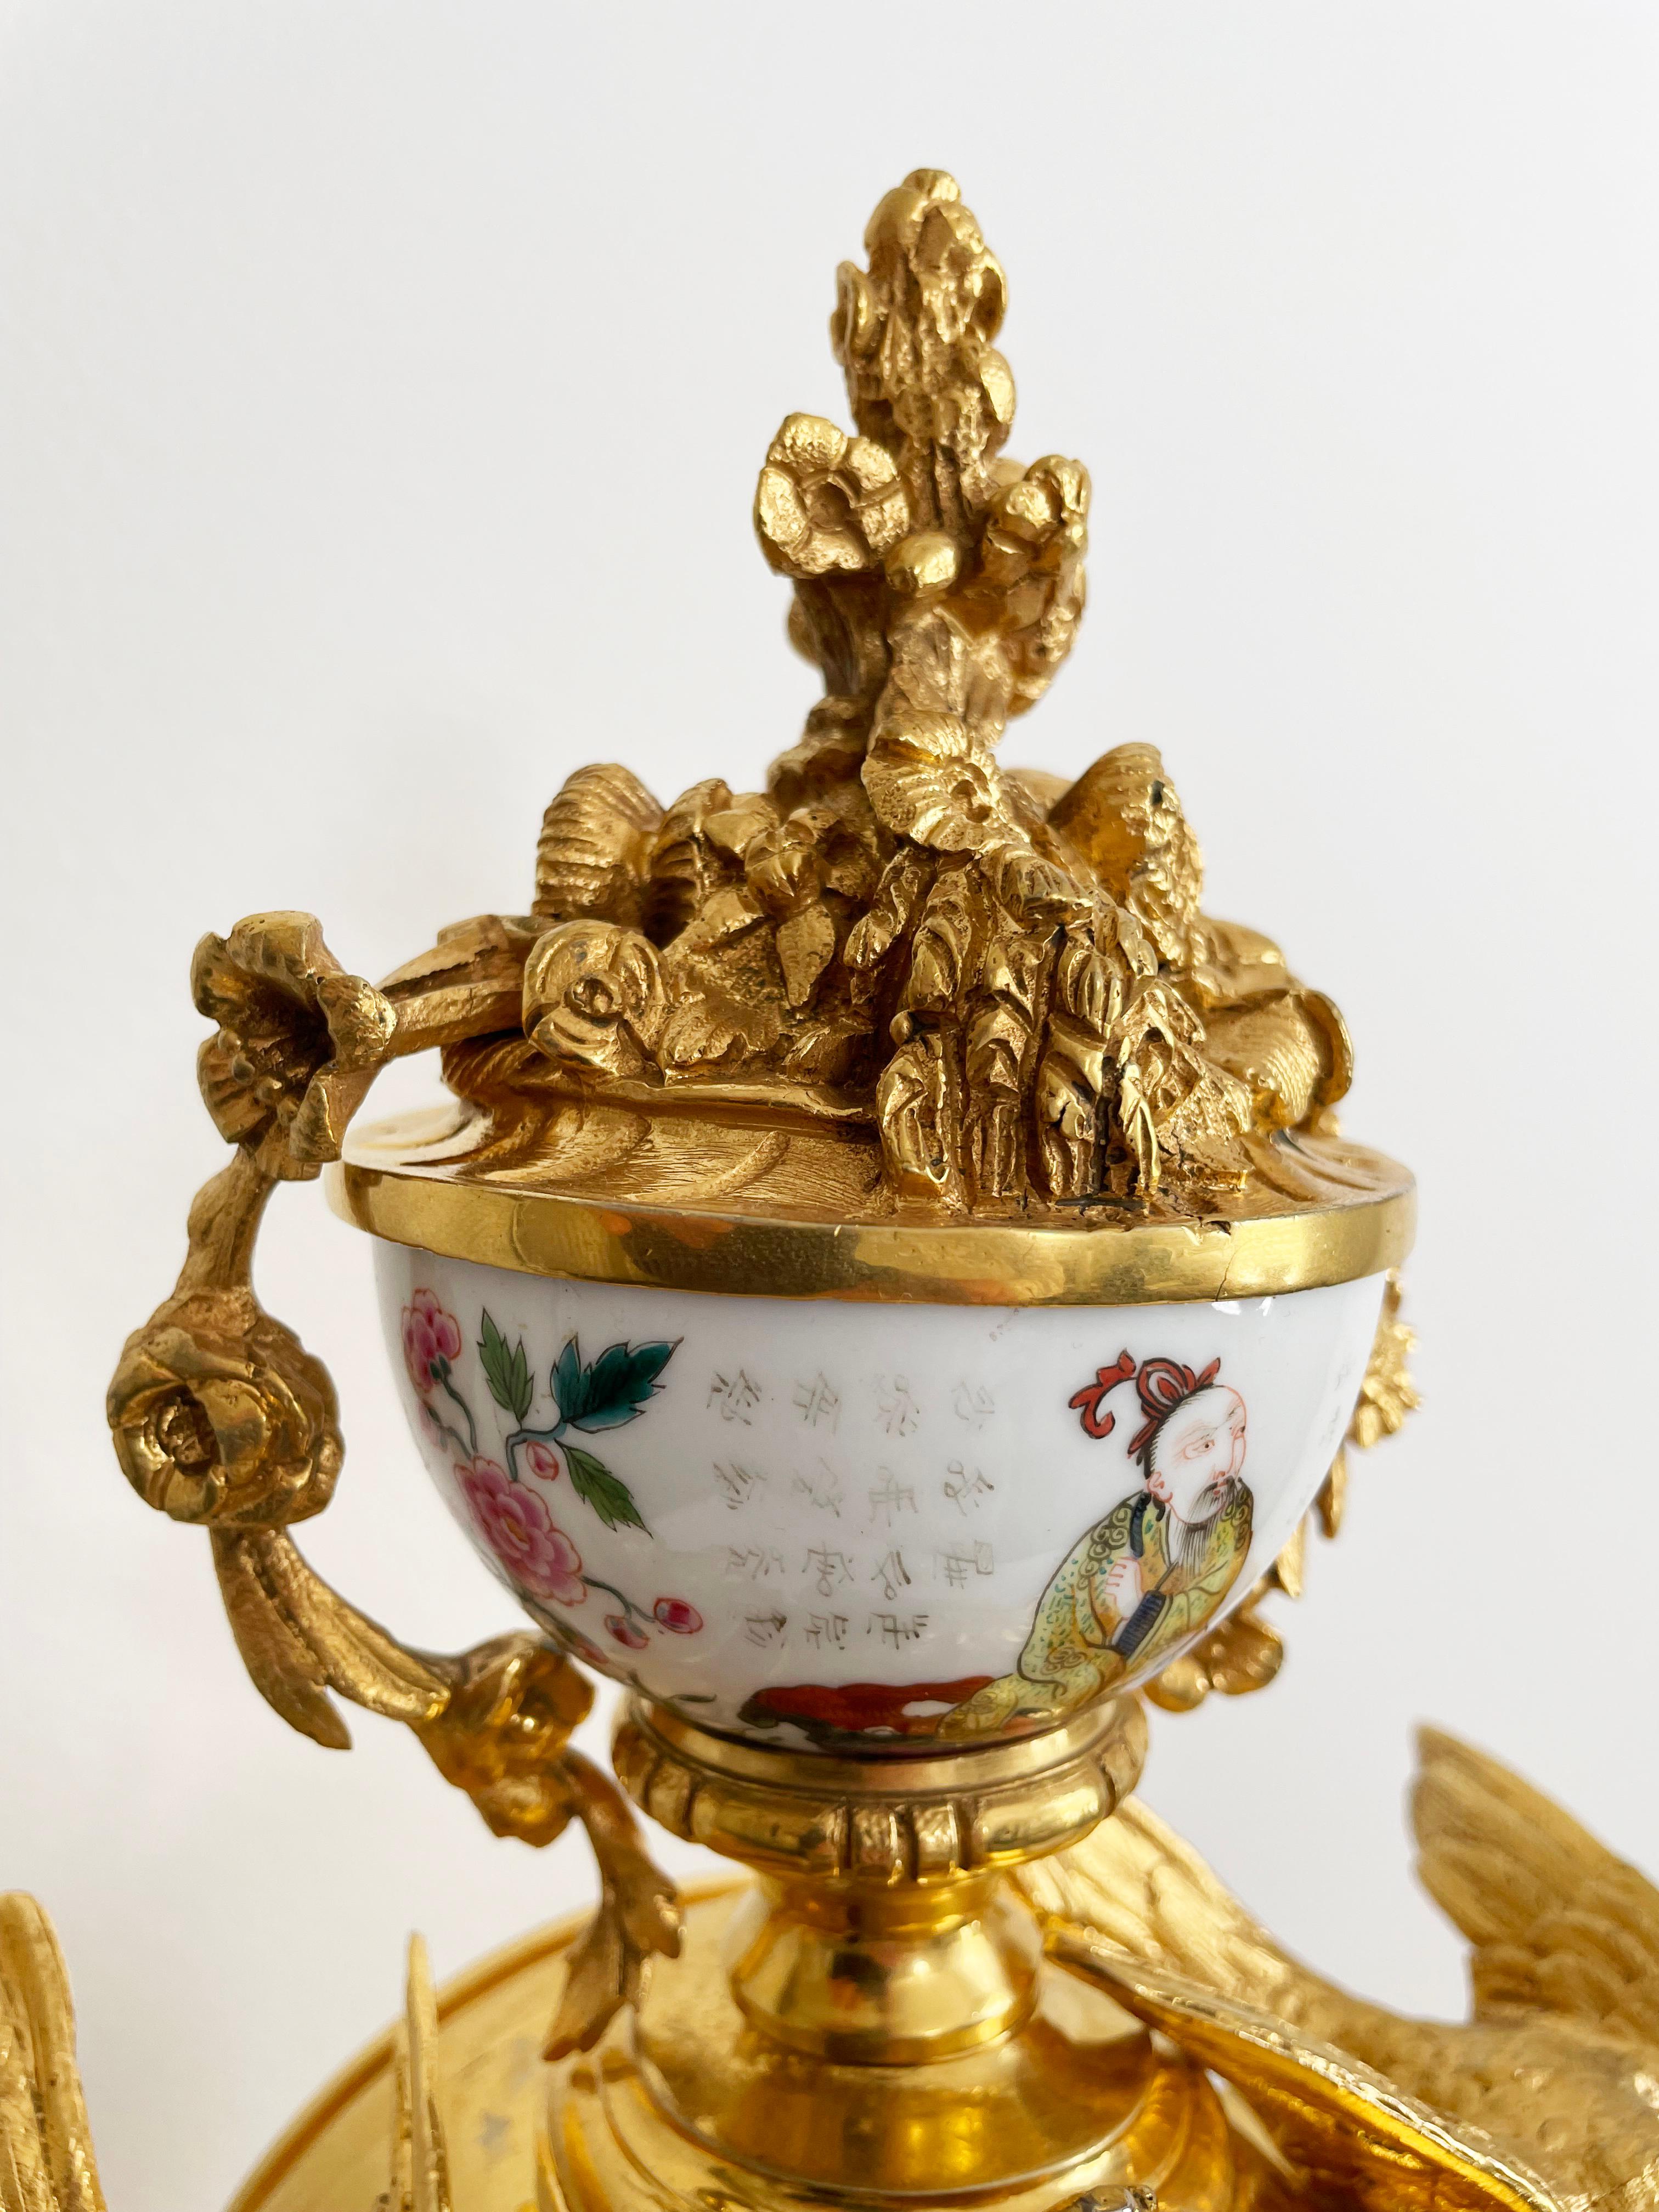 French Gilt Bronze And Porcelain Chinoiserie Themed Mantel Clock, 19th Century For Sale 7